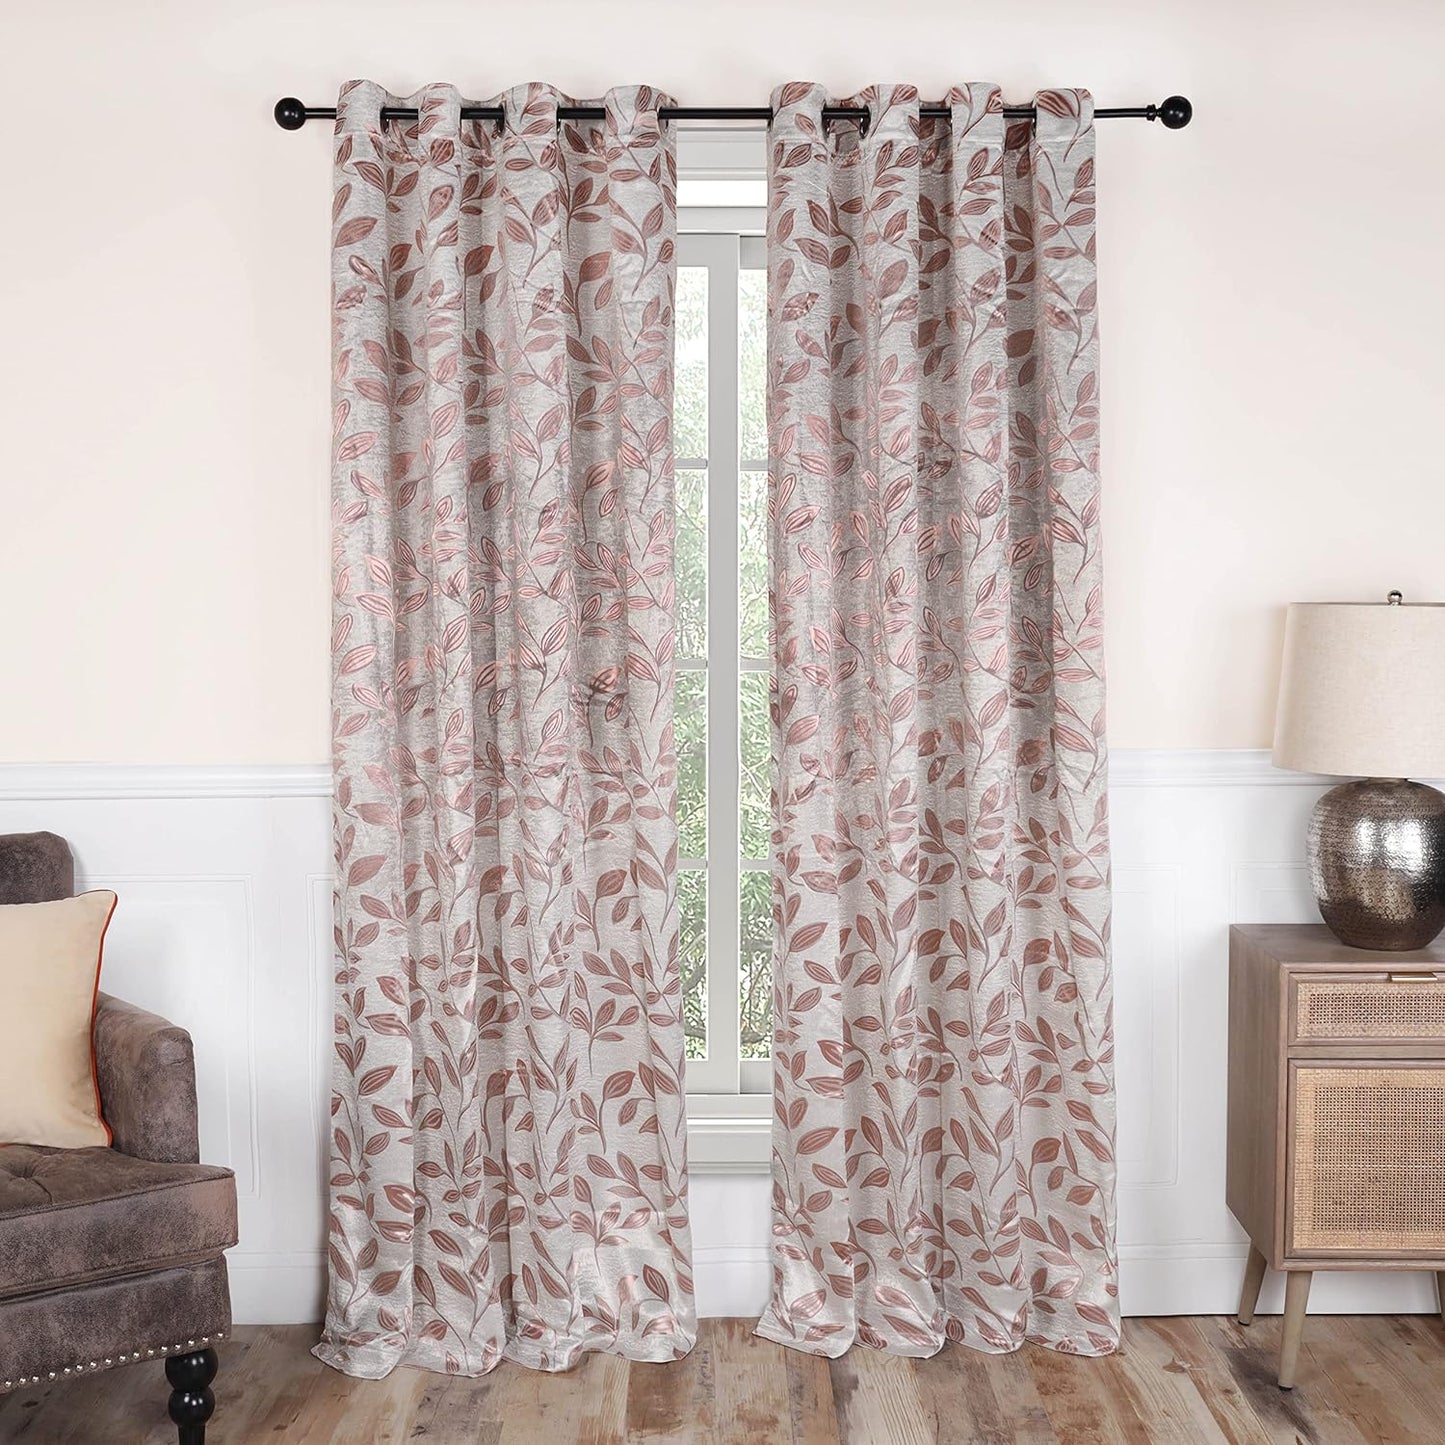 Superior Blackout Curtains, Room Darkening Window Accent for Bedroom, Sun Blocking, Thermal, Modern Bohemian Curtains, Leaves Collection, Set of 2 Panels, Rod Pocket - 52 in X 63 In, Nickel Black  Home City Inc. Bronze 52 In X 72 In (W X L) 